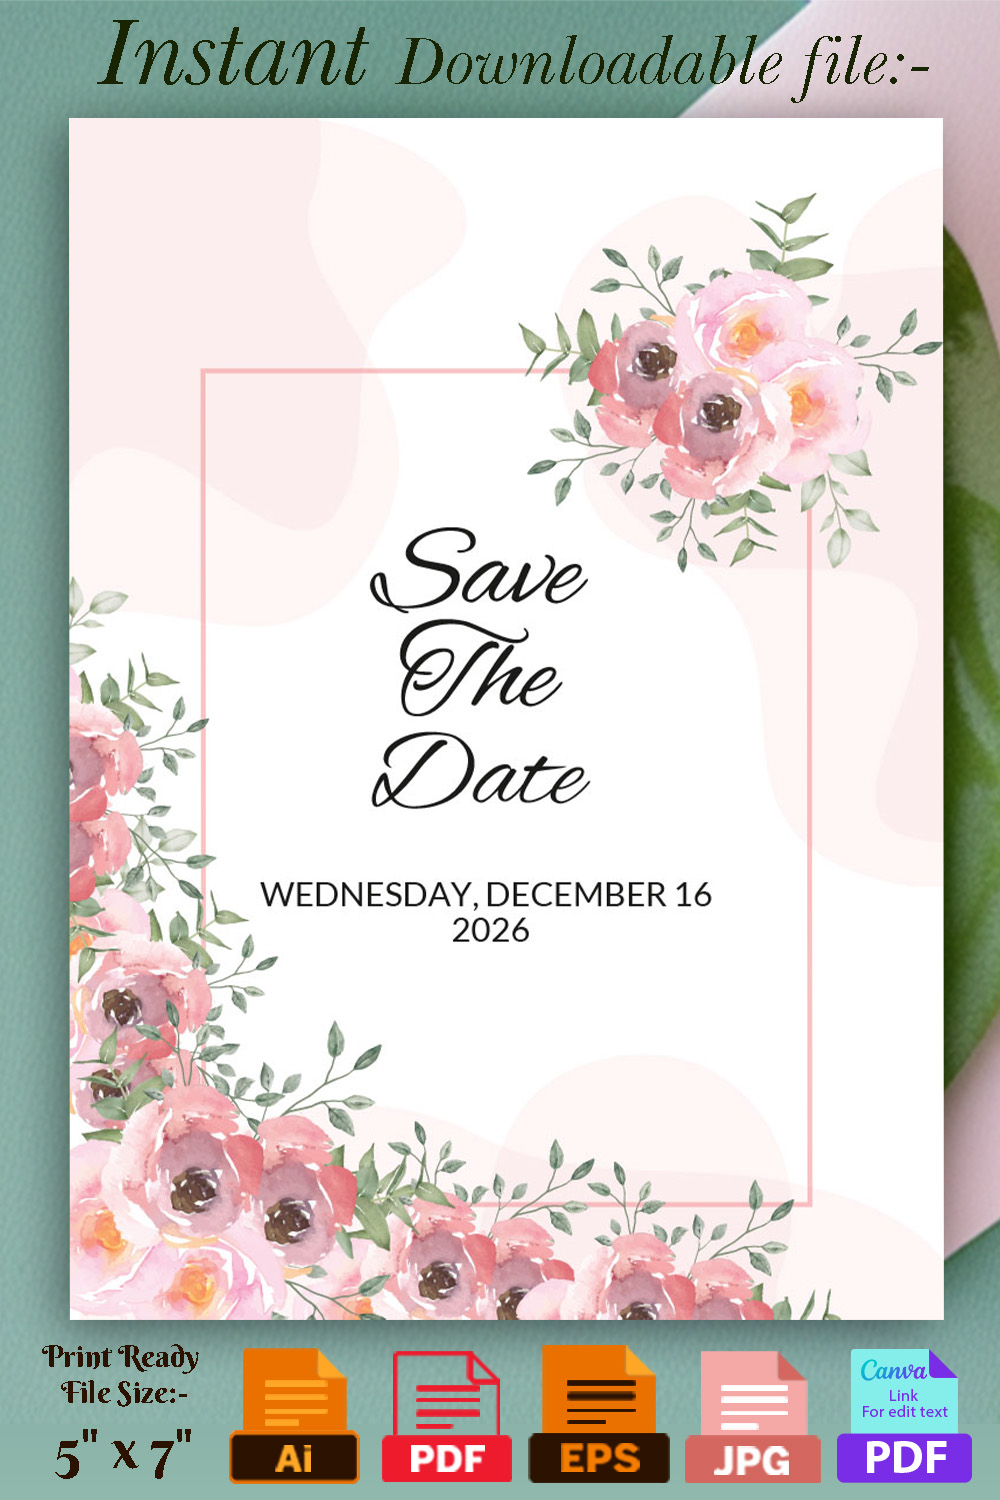 An image of a gorgeous marriage invitation card with a floral background.